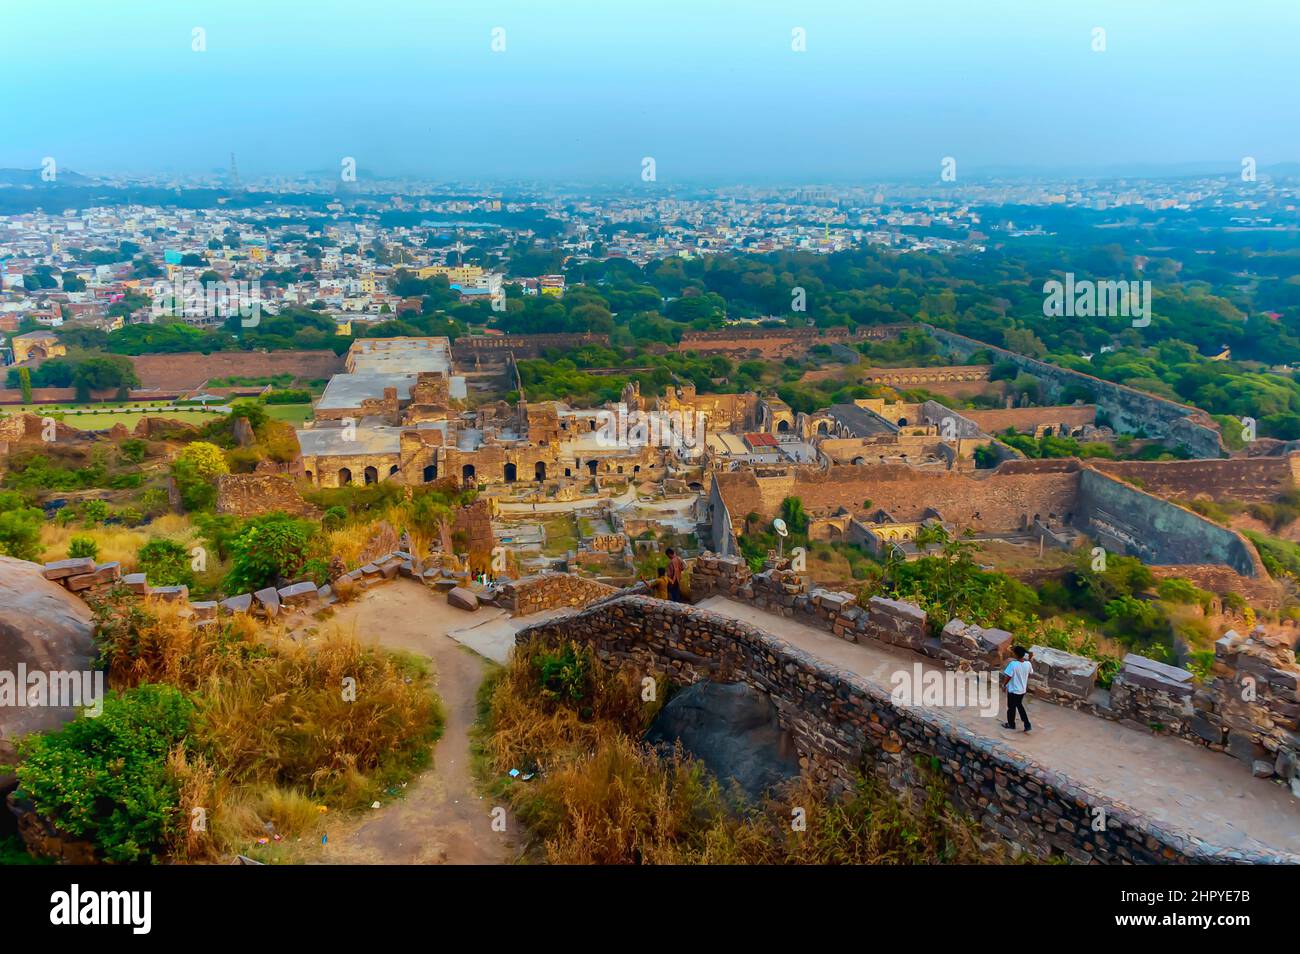 A view of the inside of the Golconda Fort in Hyderabad, Telangana, India. The skyline of the city is visible in the background. Stock Photo